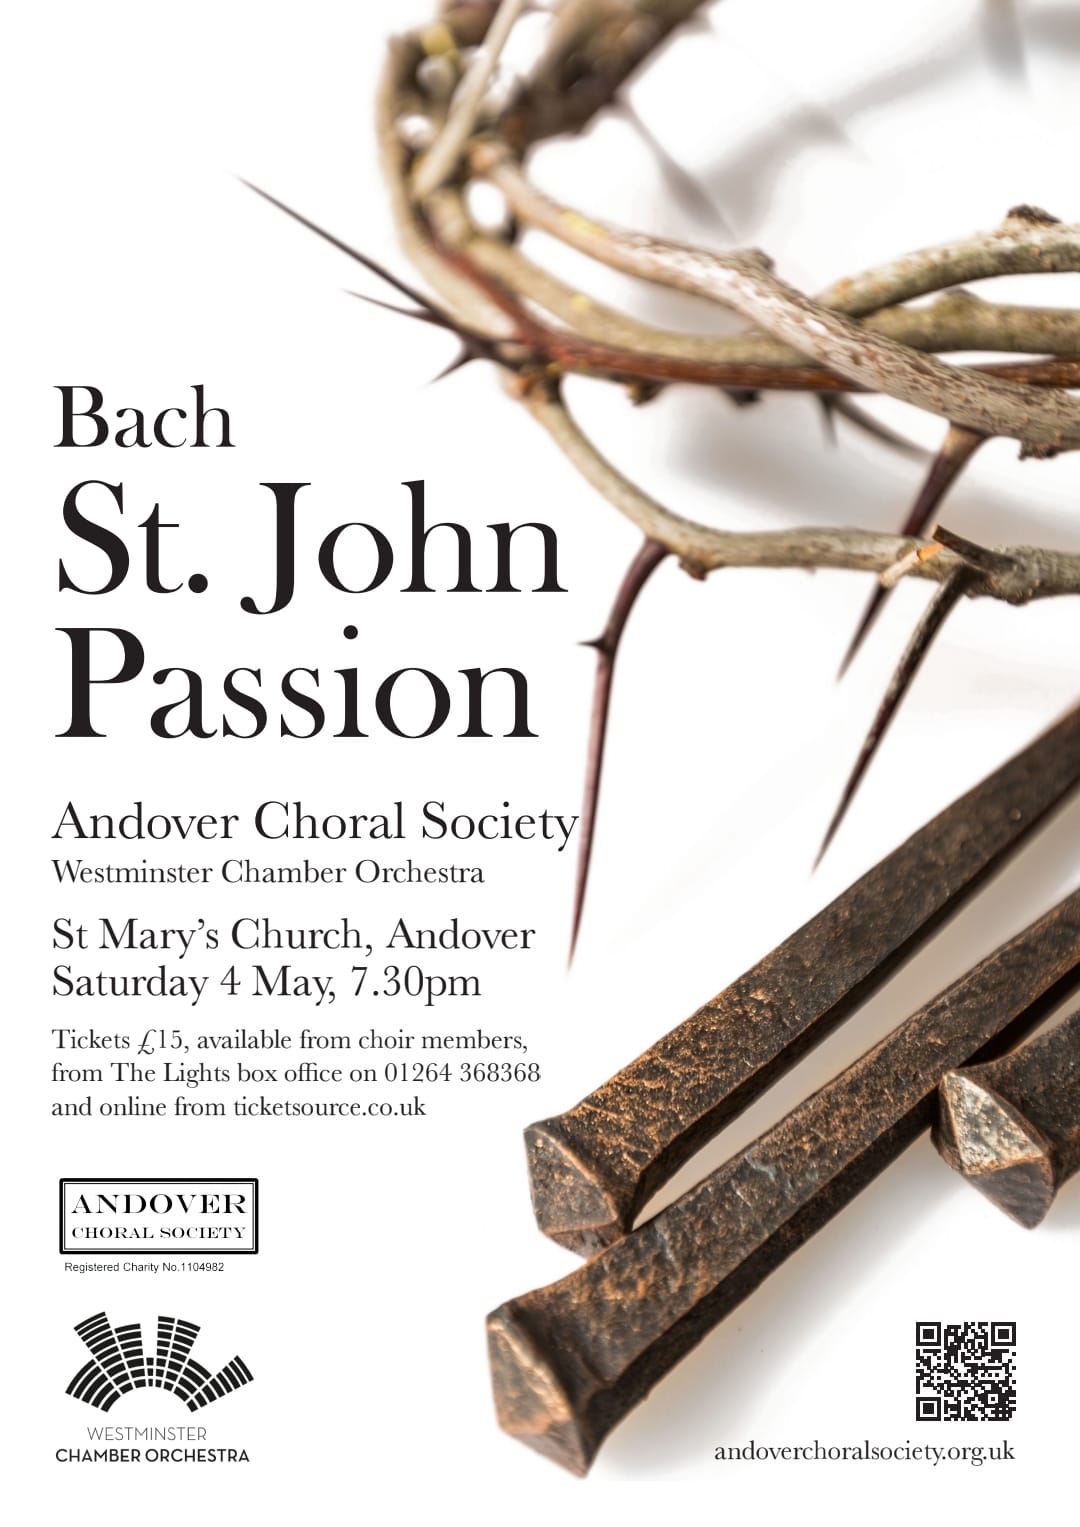 Andover Choral Society: Westminster Chamber Orchestra - Bach St. John Passion